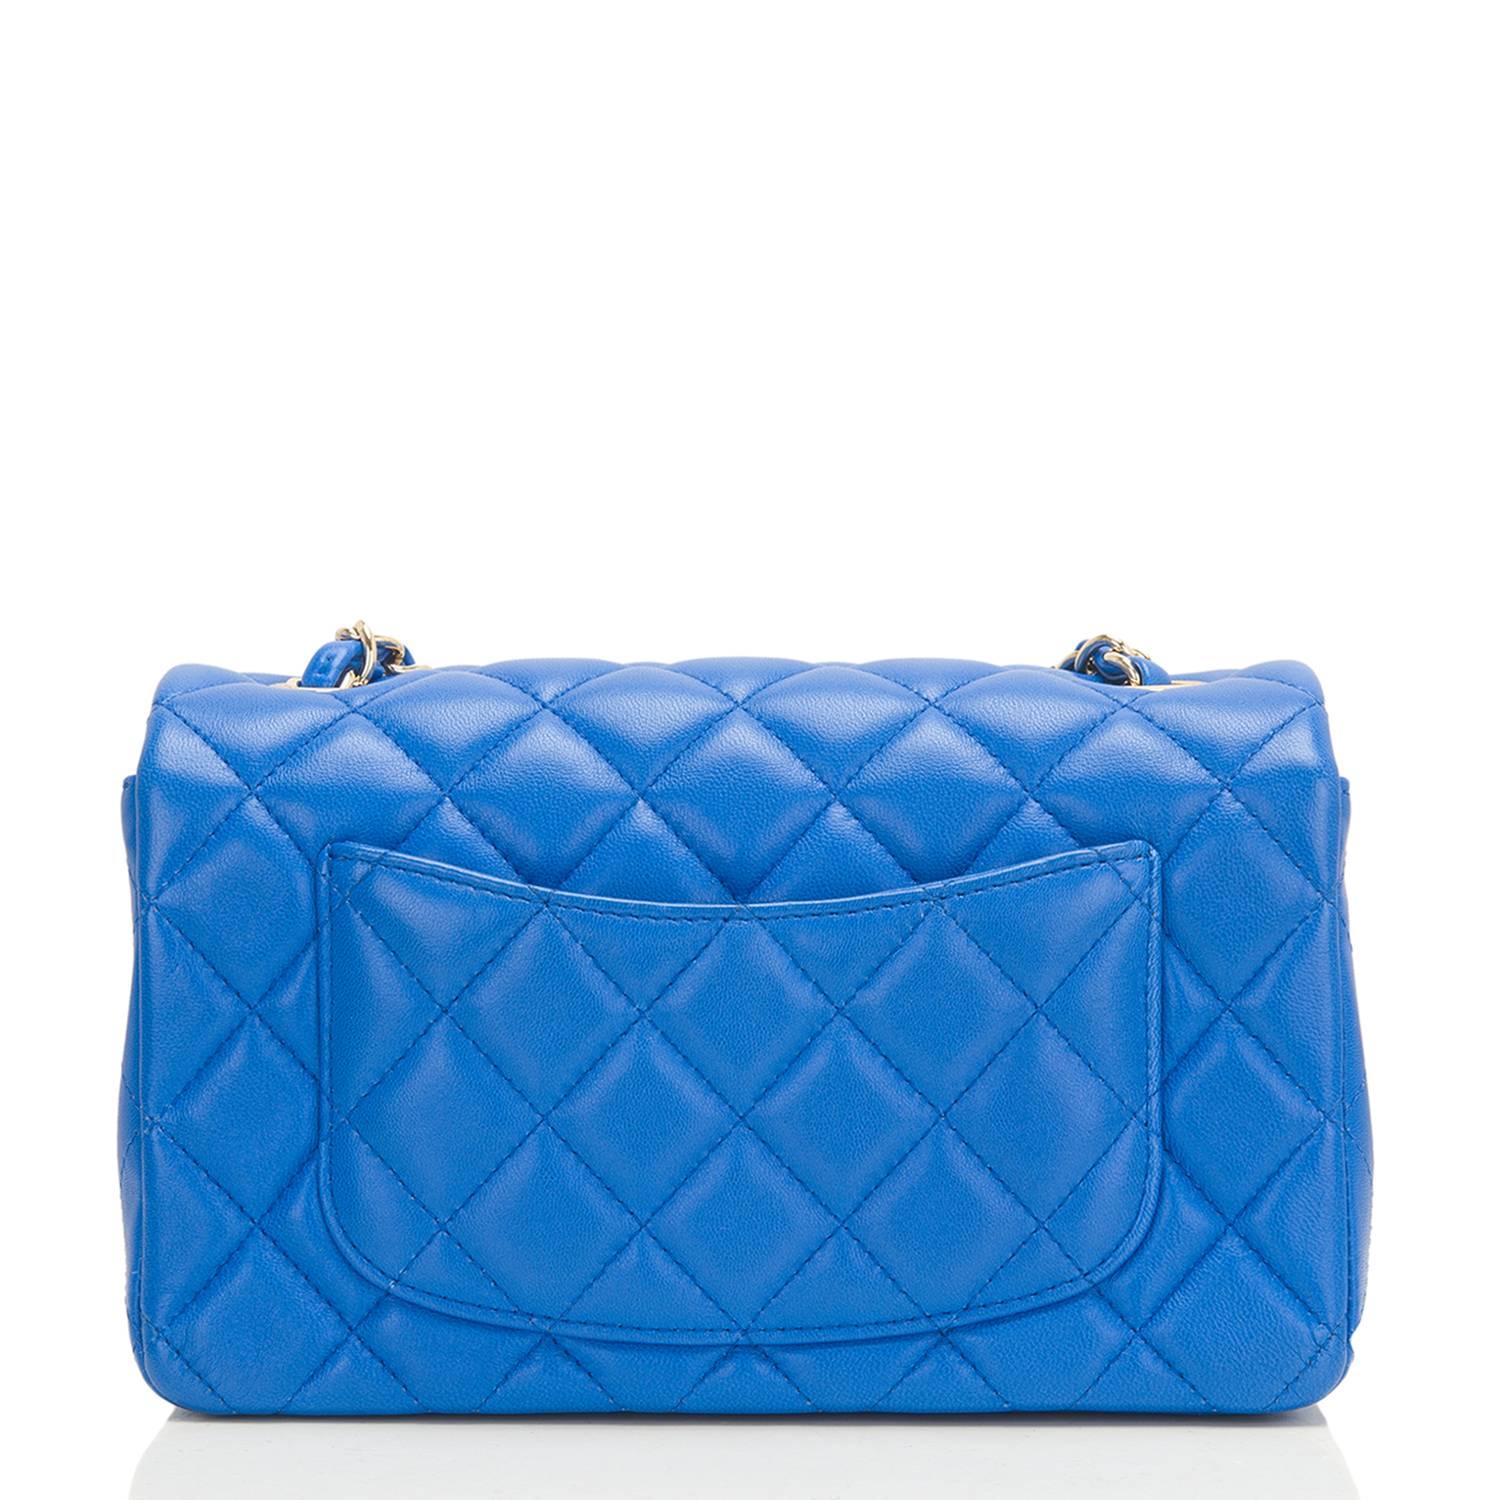 Women's Chanel Blue Quilted Lambskin Rectangular Mini Classic Flap Bag For Sale